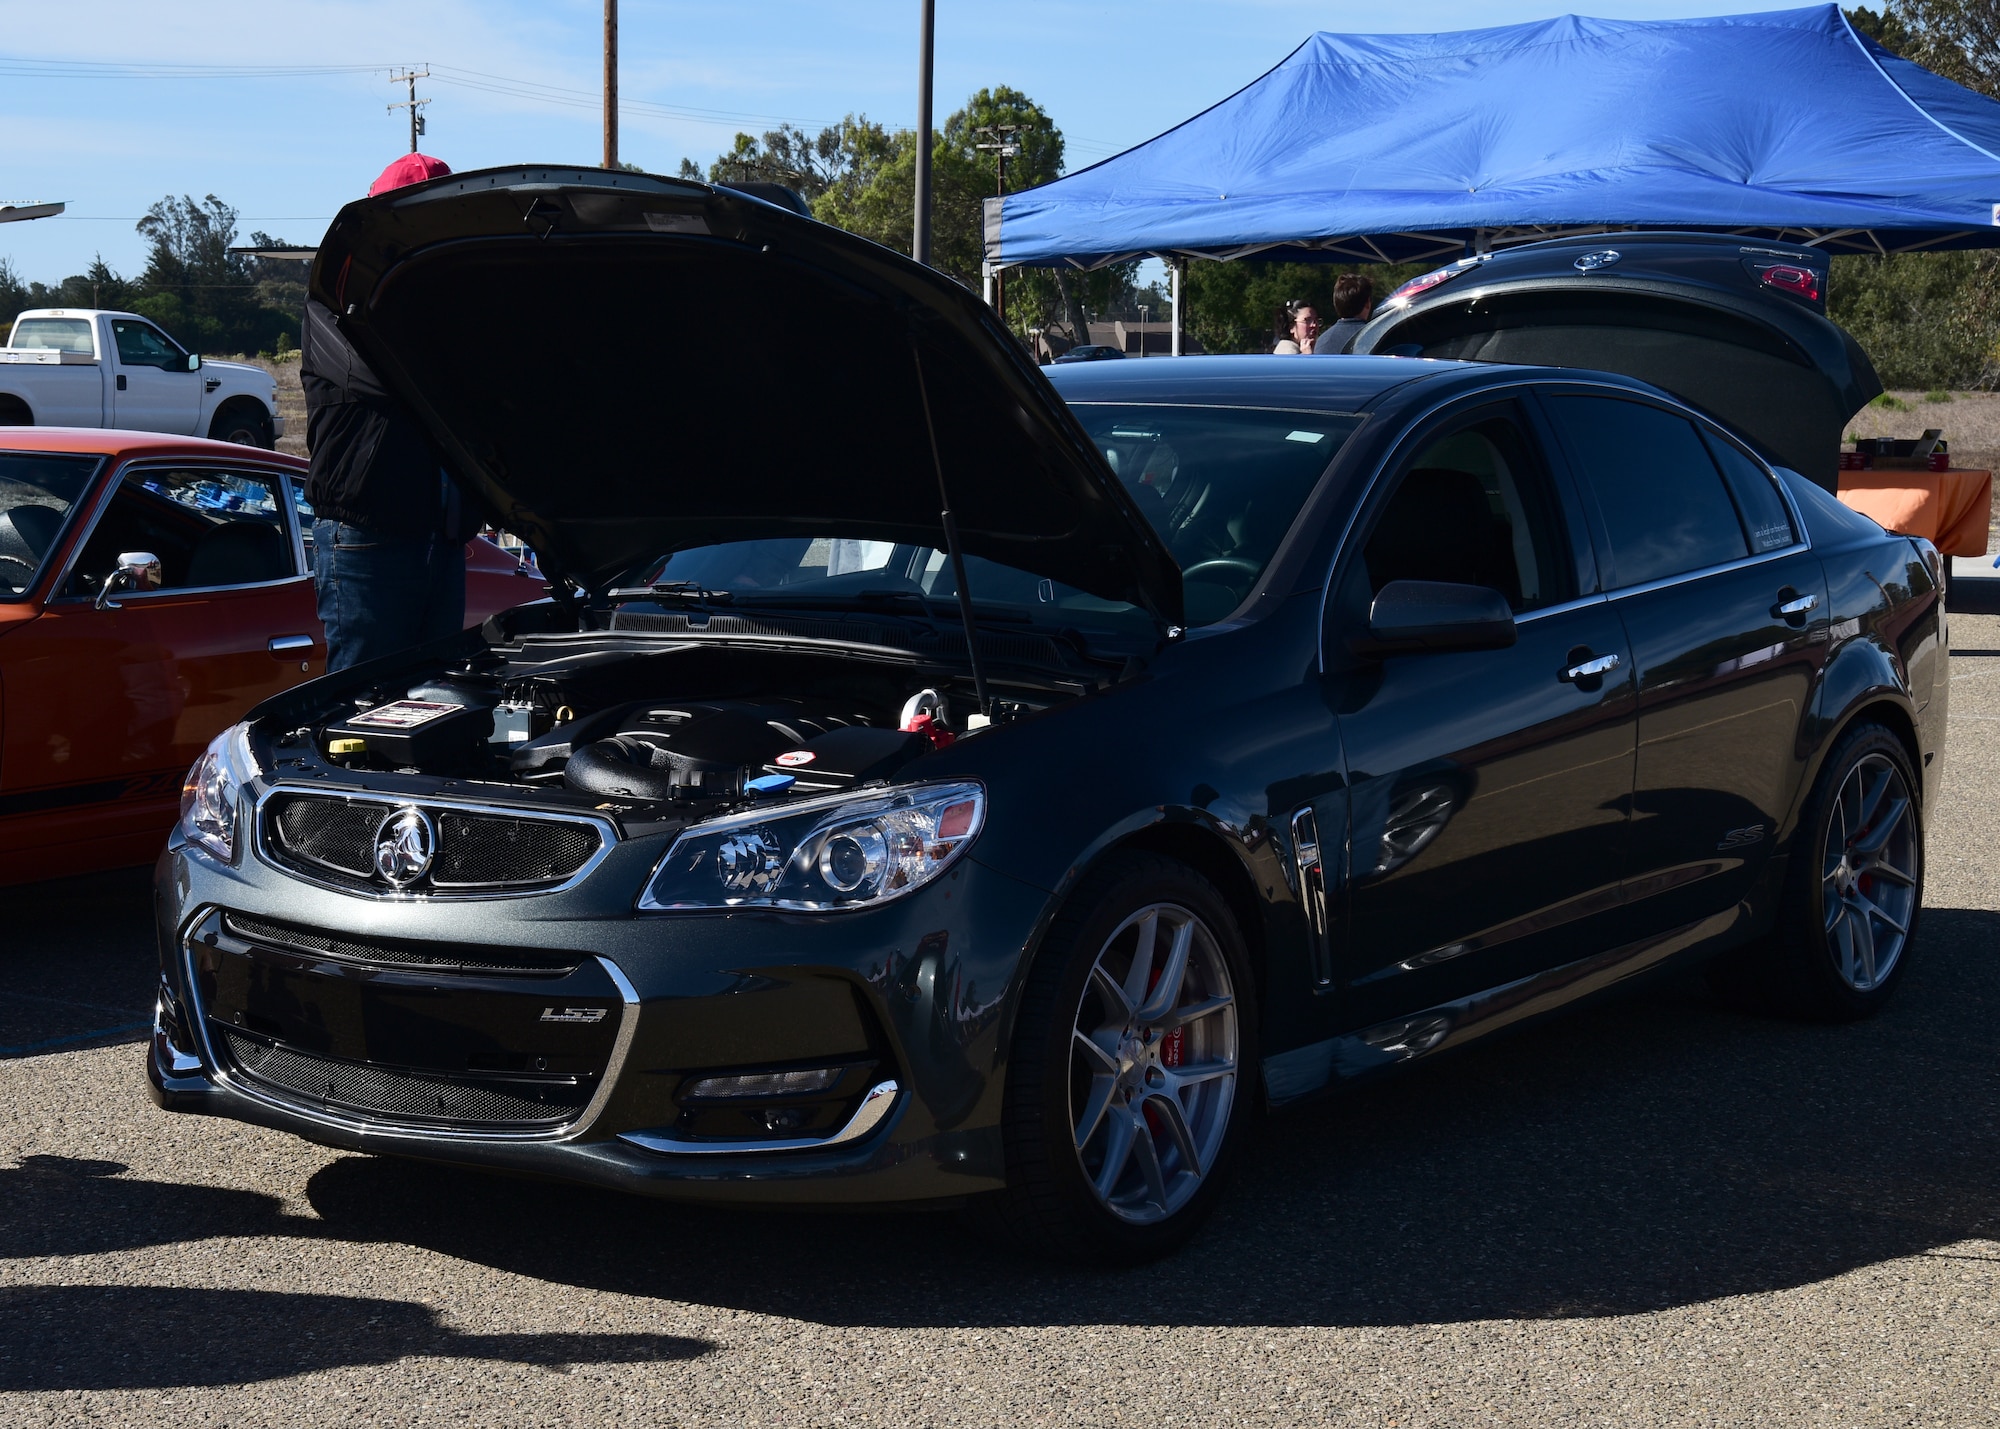 A Holden Commodore LS3 is displayed during Vandenberg’s Ninth Annual Exotic Car Show Oct. 23, 2021, at Vandenberg Space Force Base, Calif. The 30th Force Support Squadron also hosts cars that are no longer being manufactured making them big collector items. (U.S. Space Force photo by Airman First Class Tiarra Sibley)